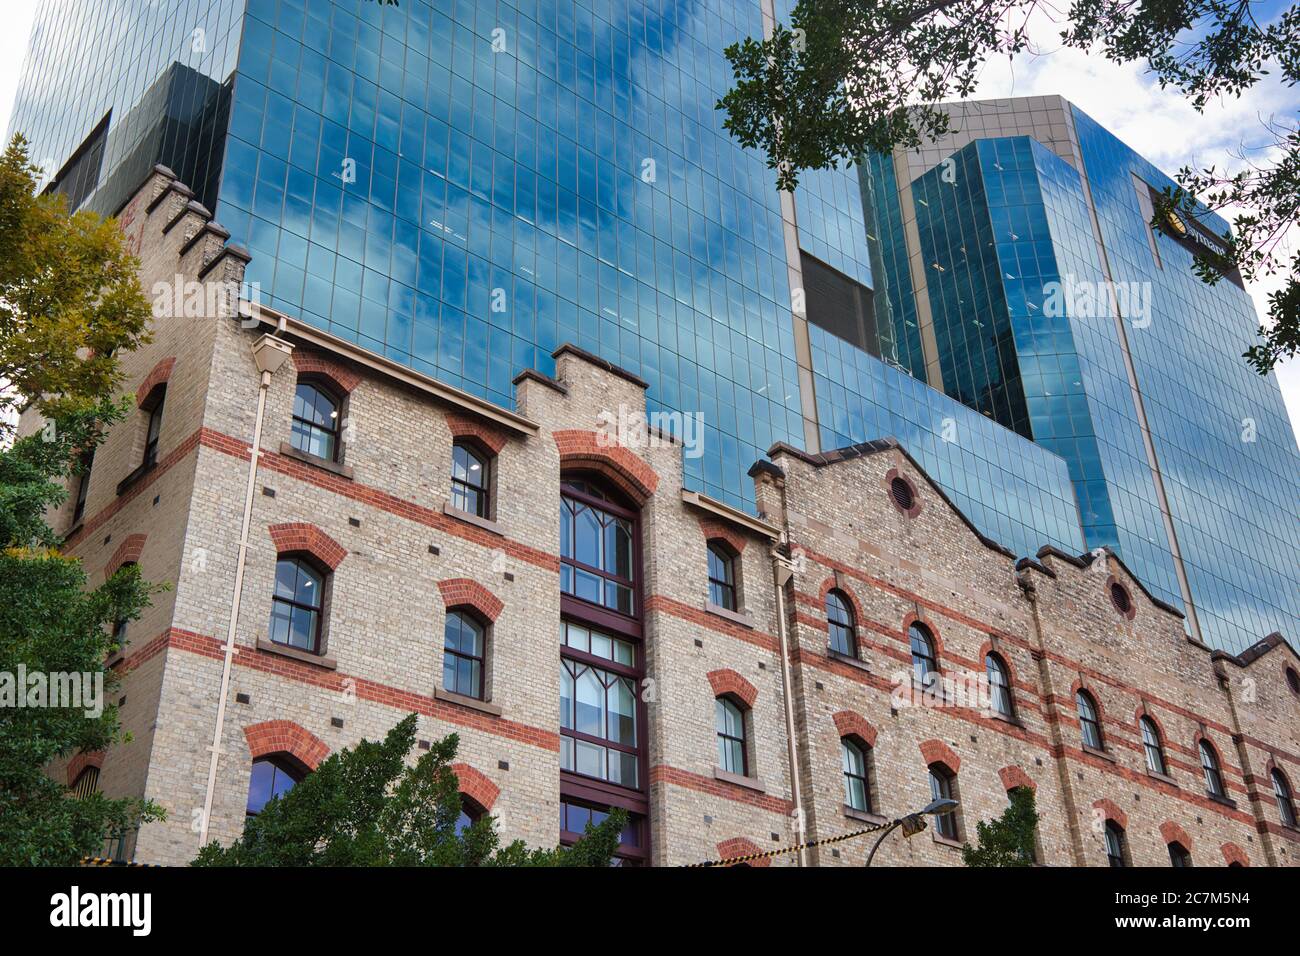 Buildings old and new in the Rocks area of Sydney, glass fronted high riser behind an early 1900s facade, in Sydney, New South Wales, Australia Stock Photo